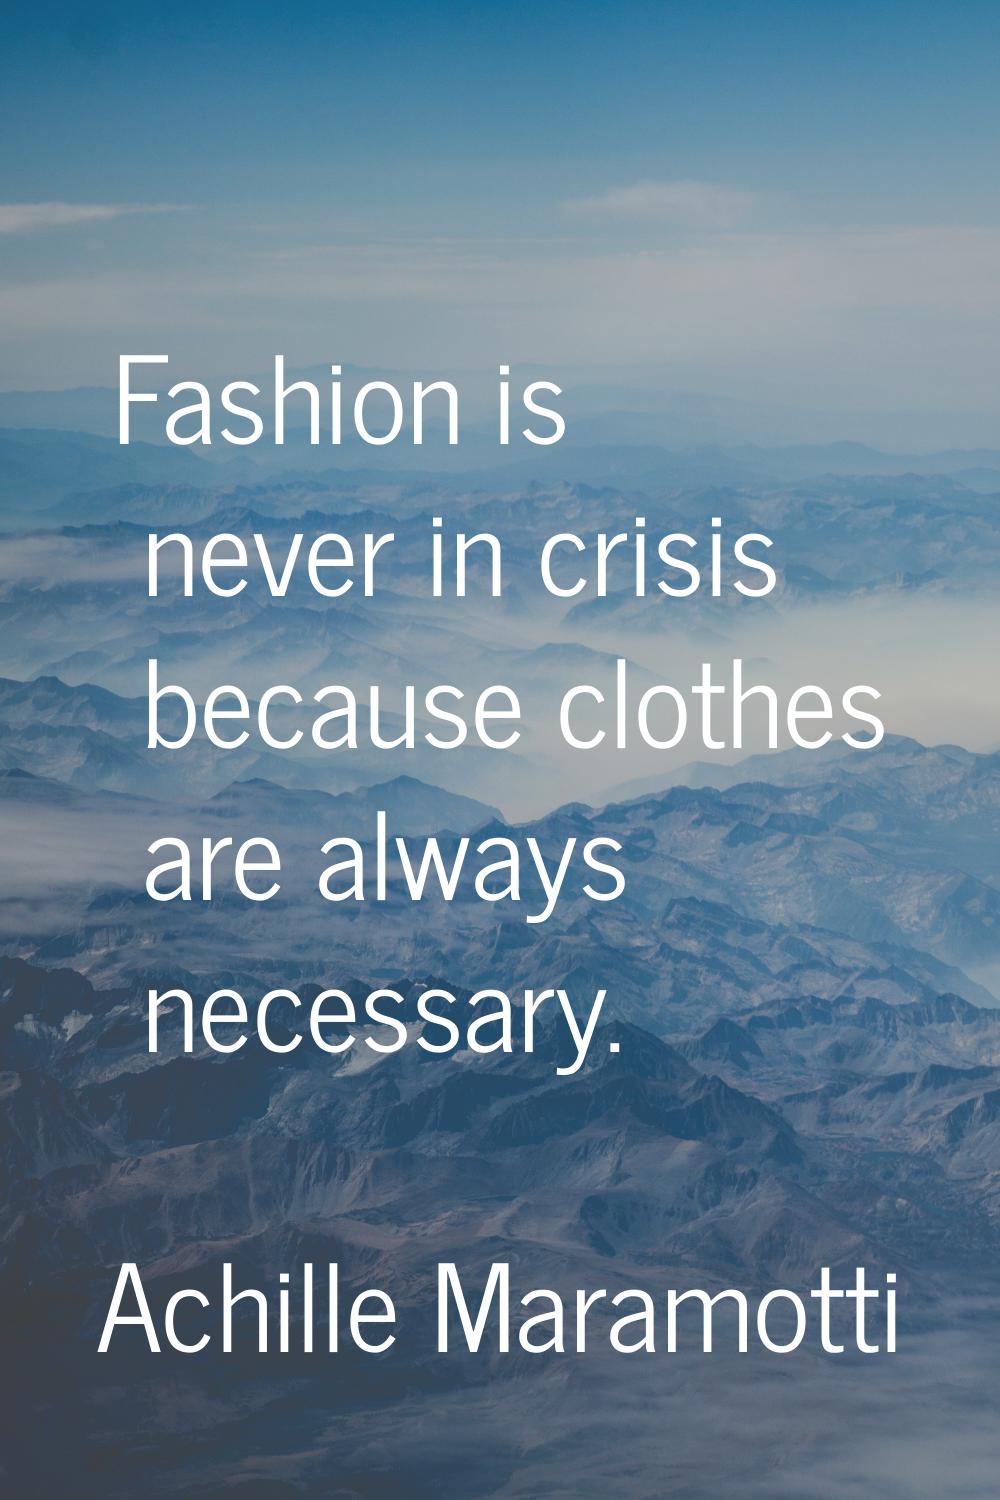 Fashion is never in crisis because clothes are always necessary.